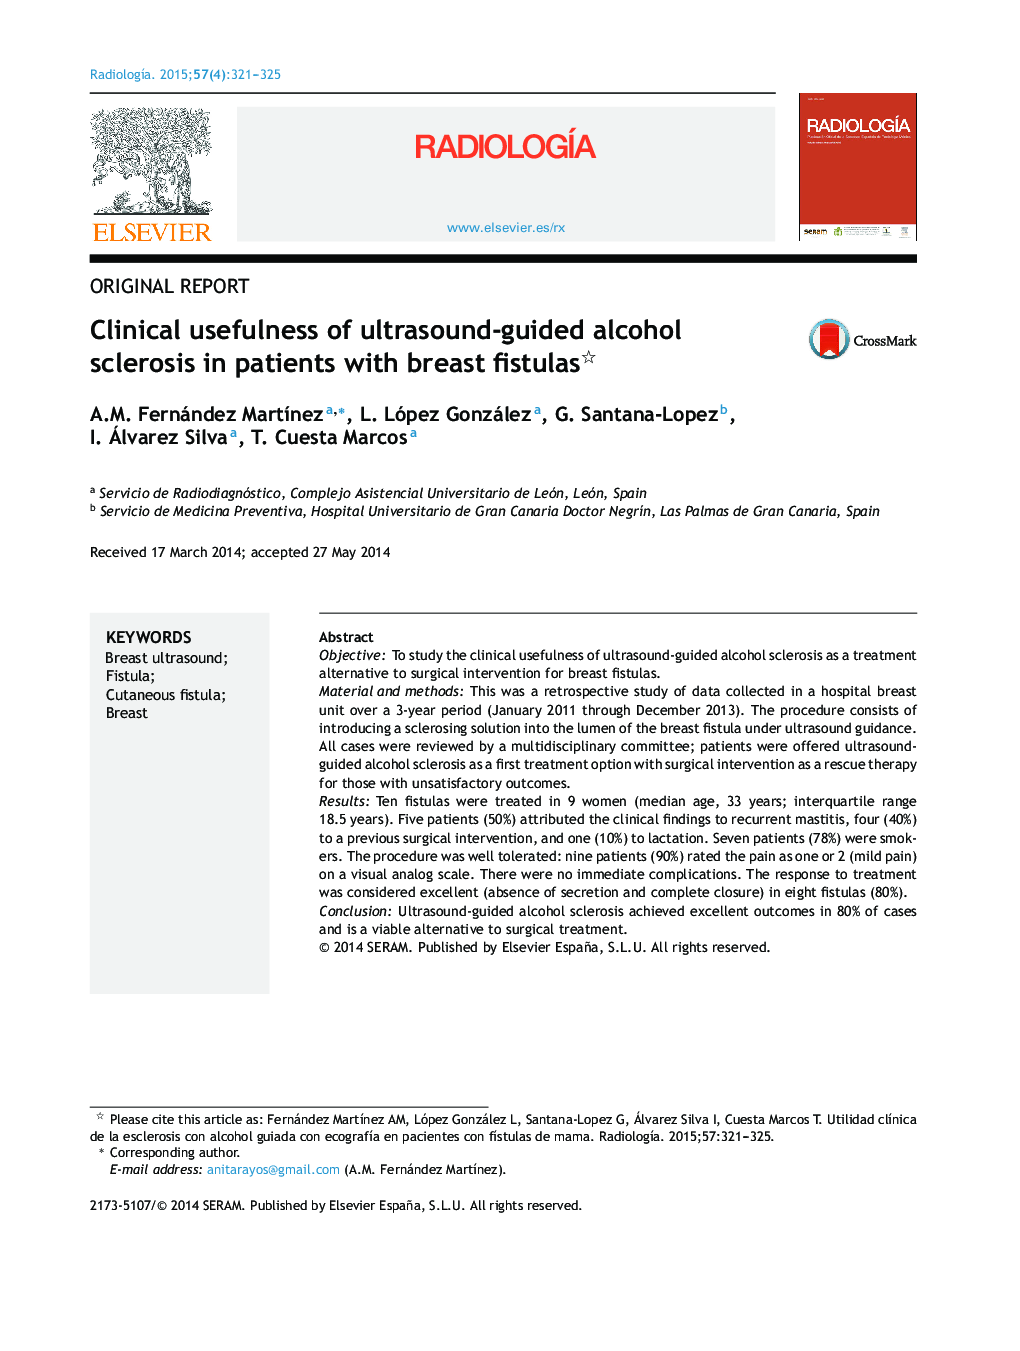 Clinical usefulness of ultrasound-guided alcohol sclerosis in patients with breast fistulas 